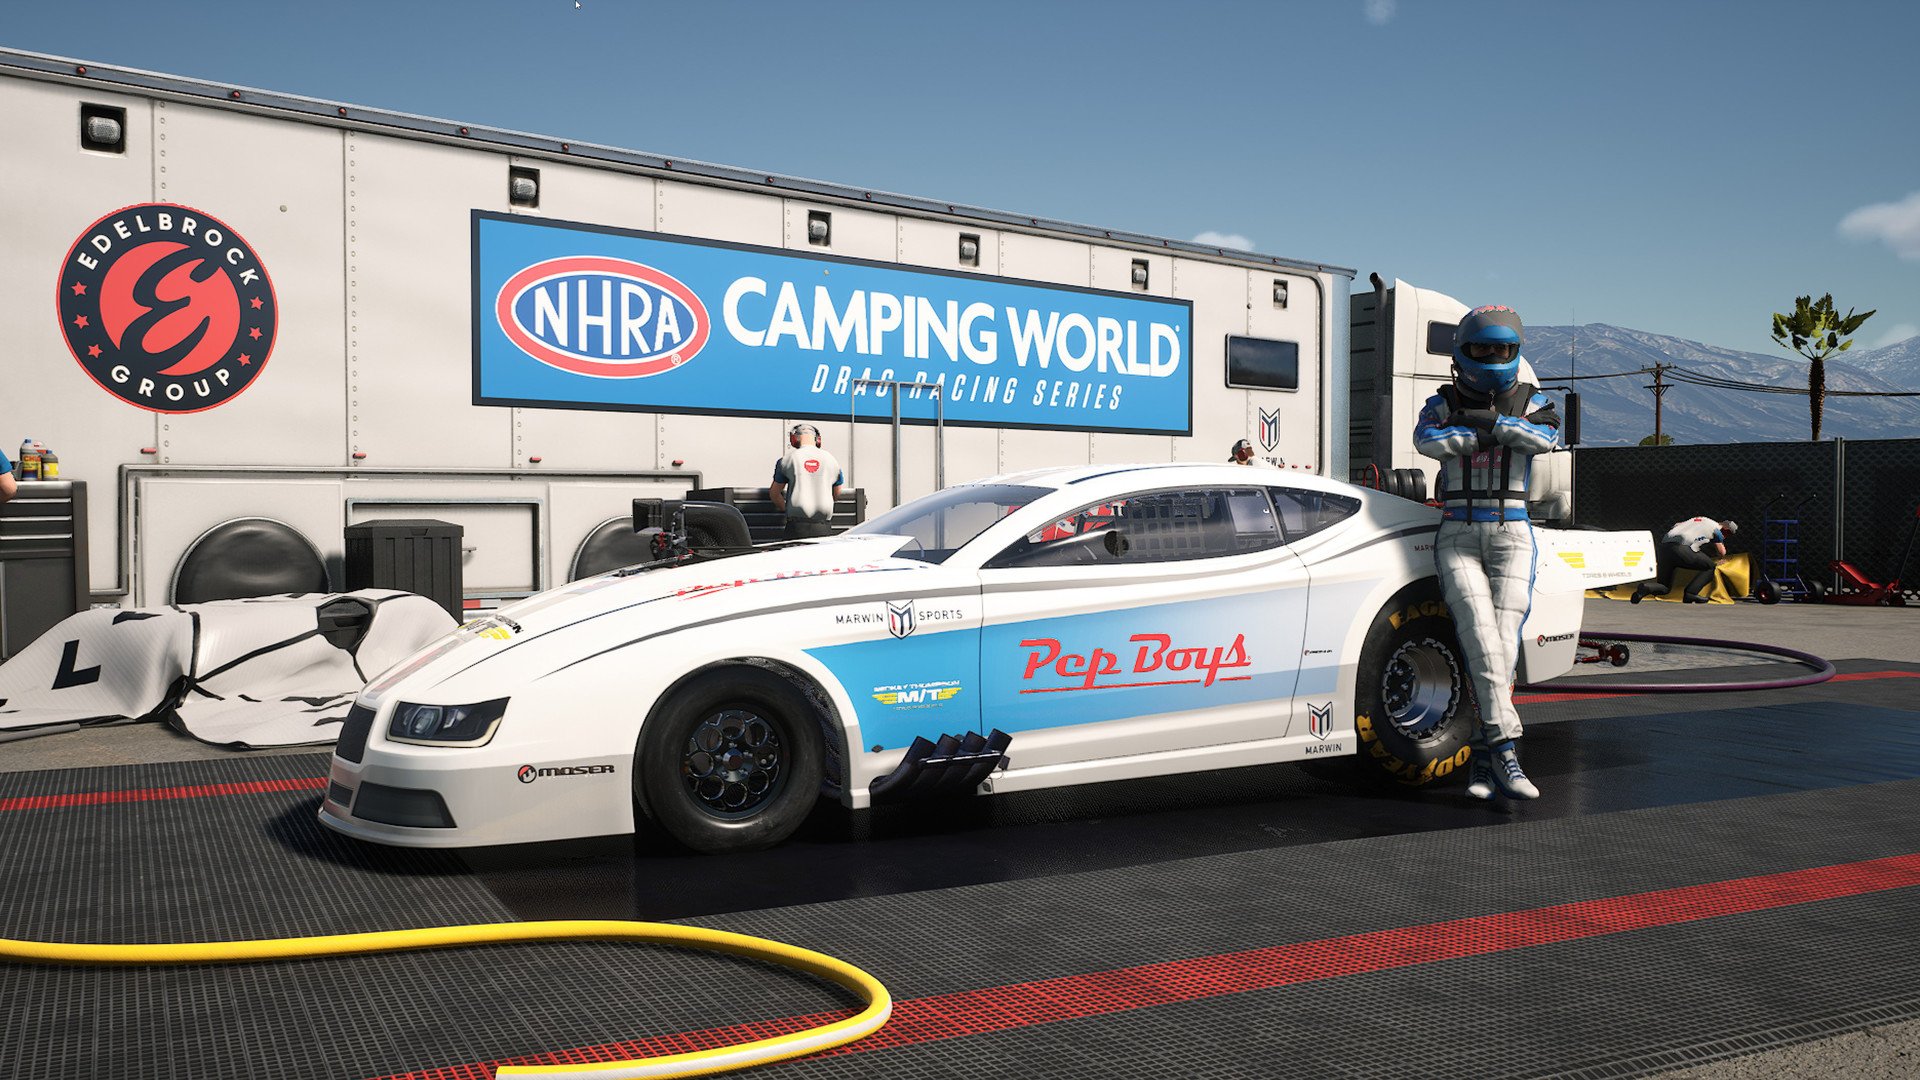 NHRA Championship Drag Racing Speed for All 5